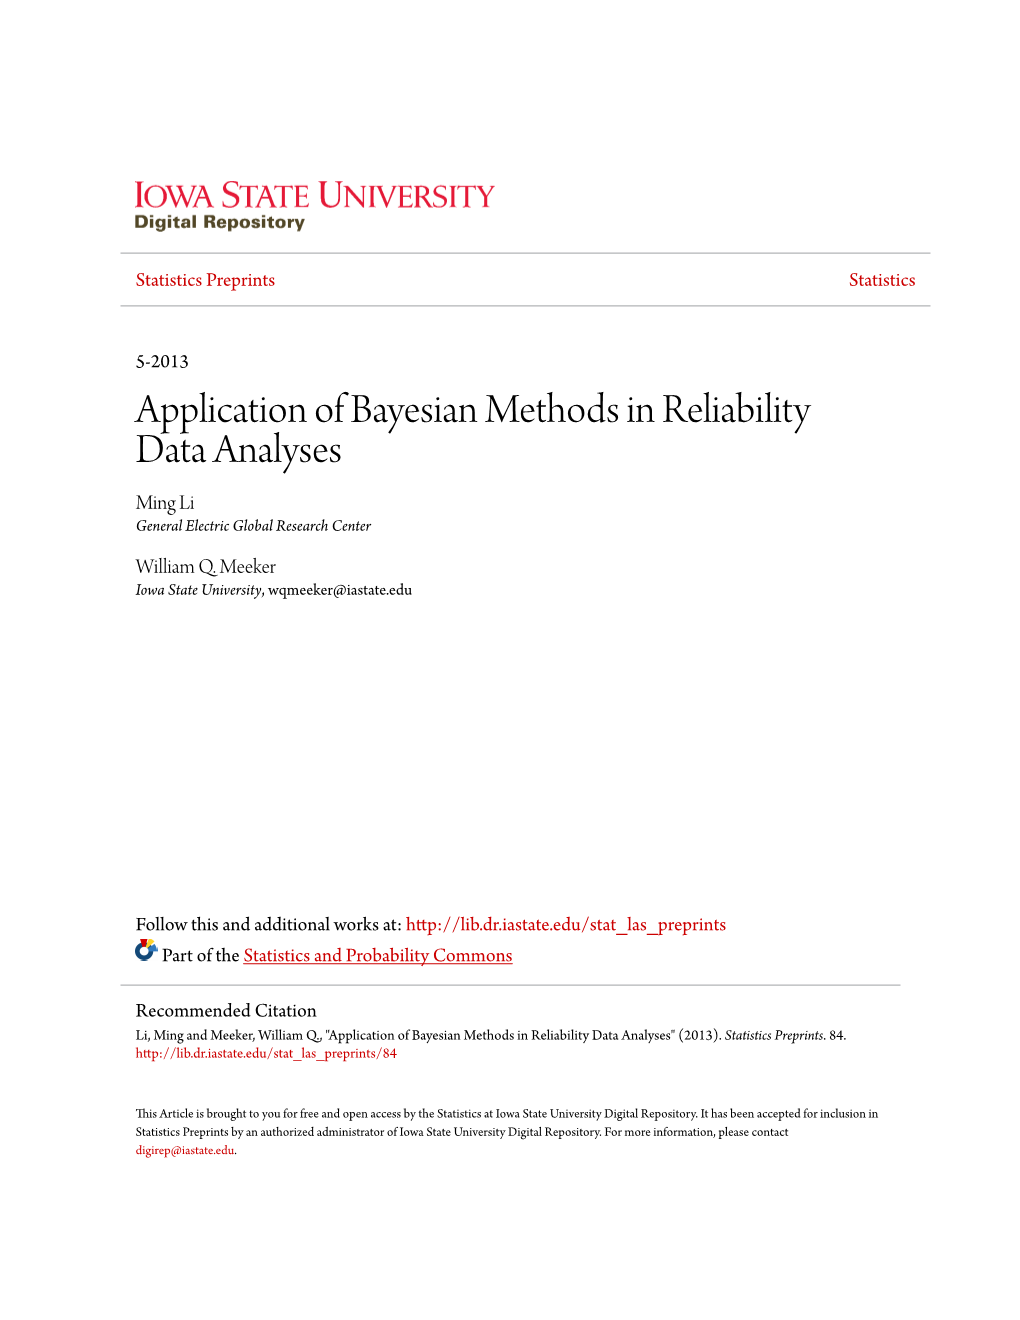 Application of Bayesian Methods in Reliability Data Analyses Ming Li General Electric Global Research Center